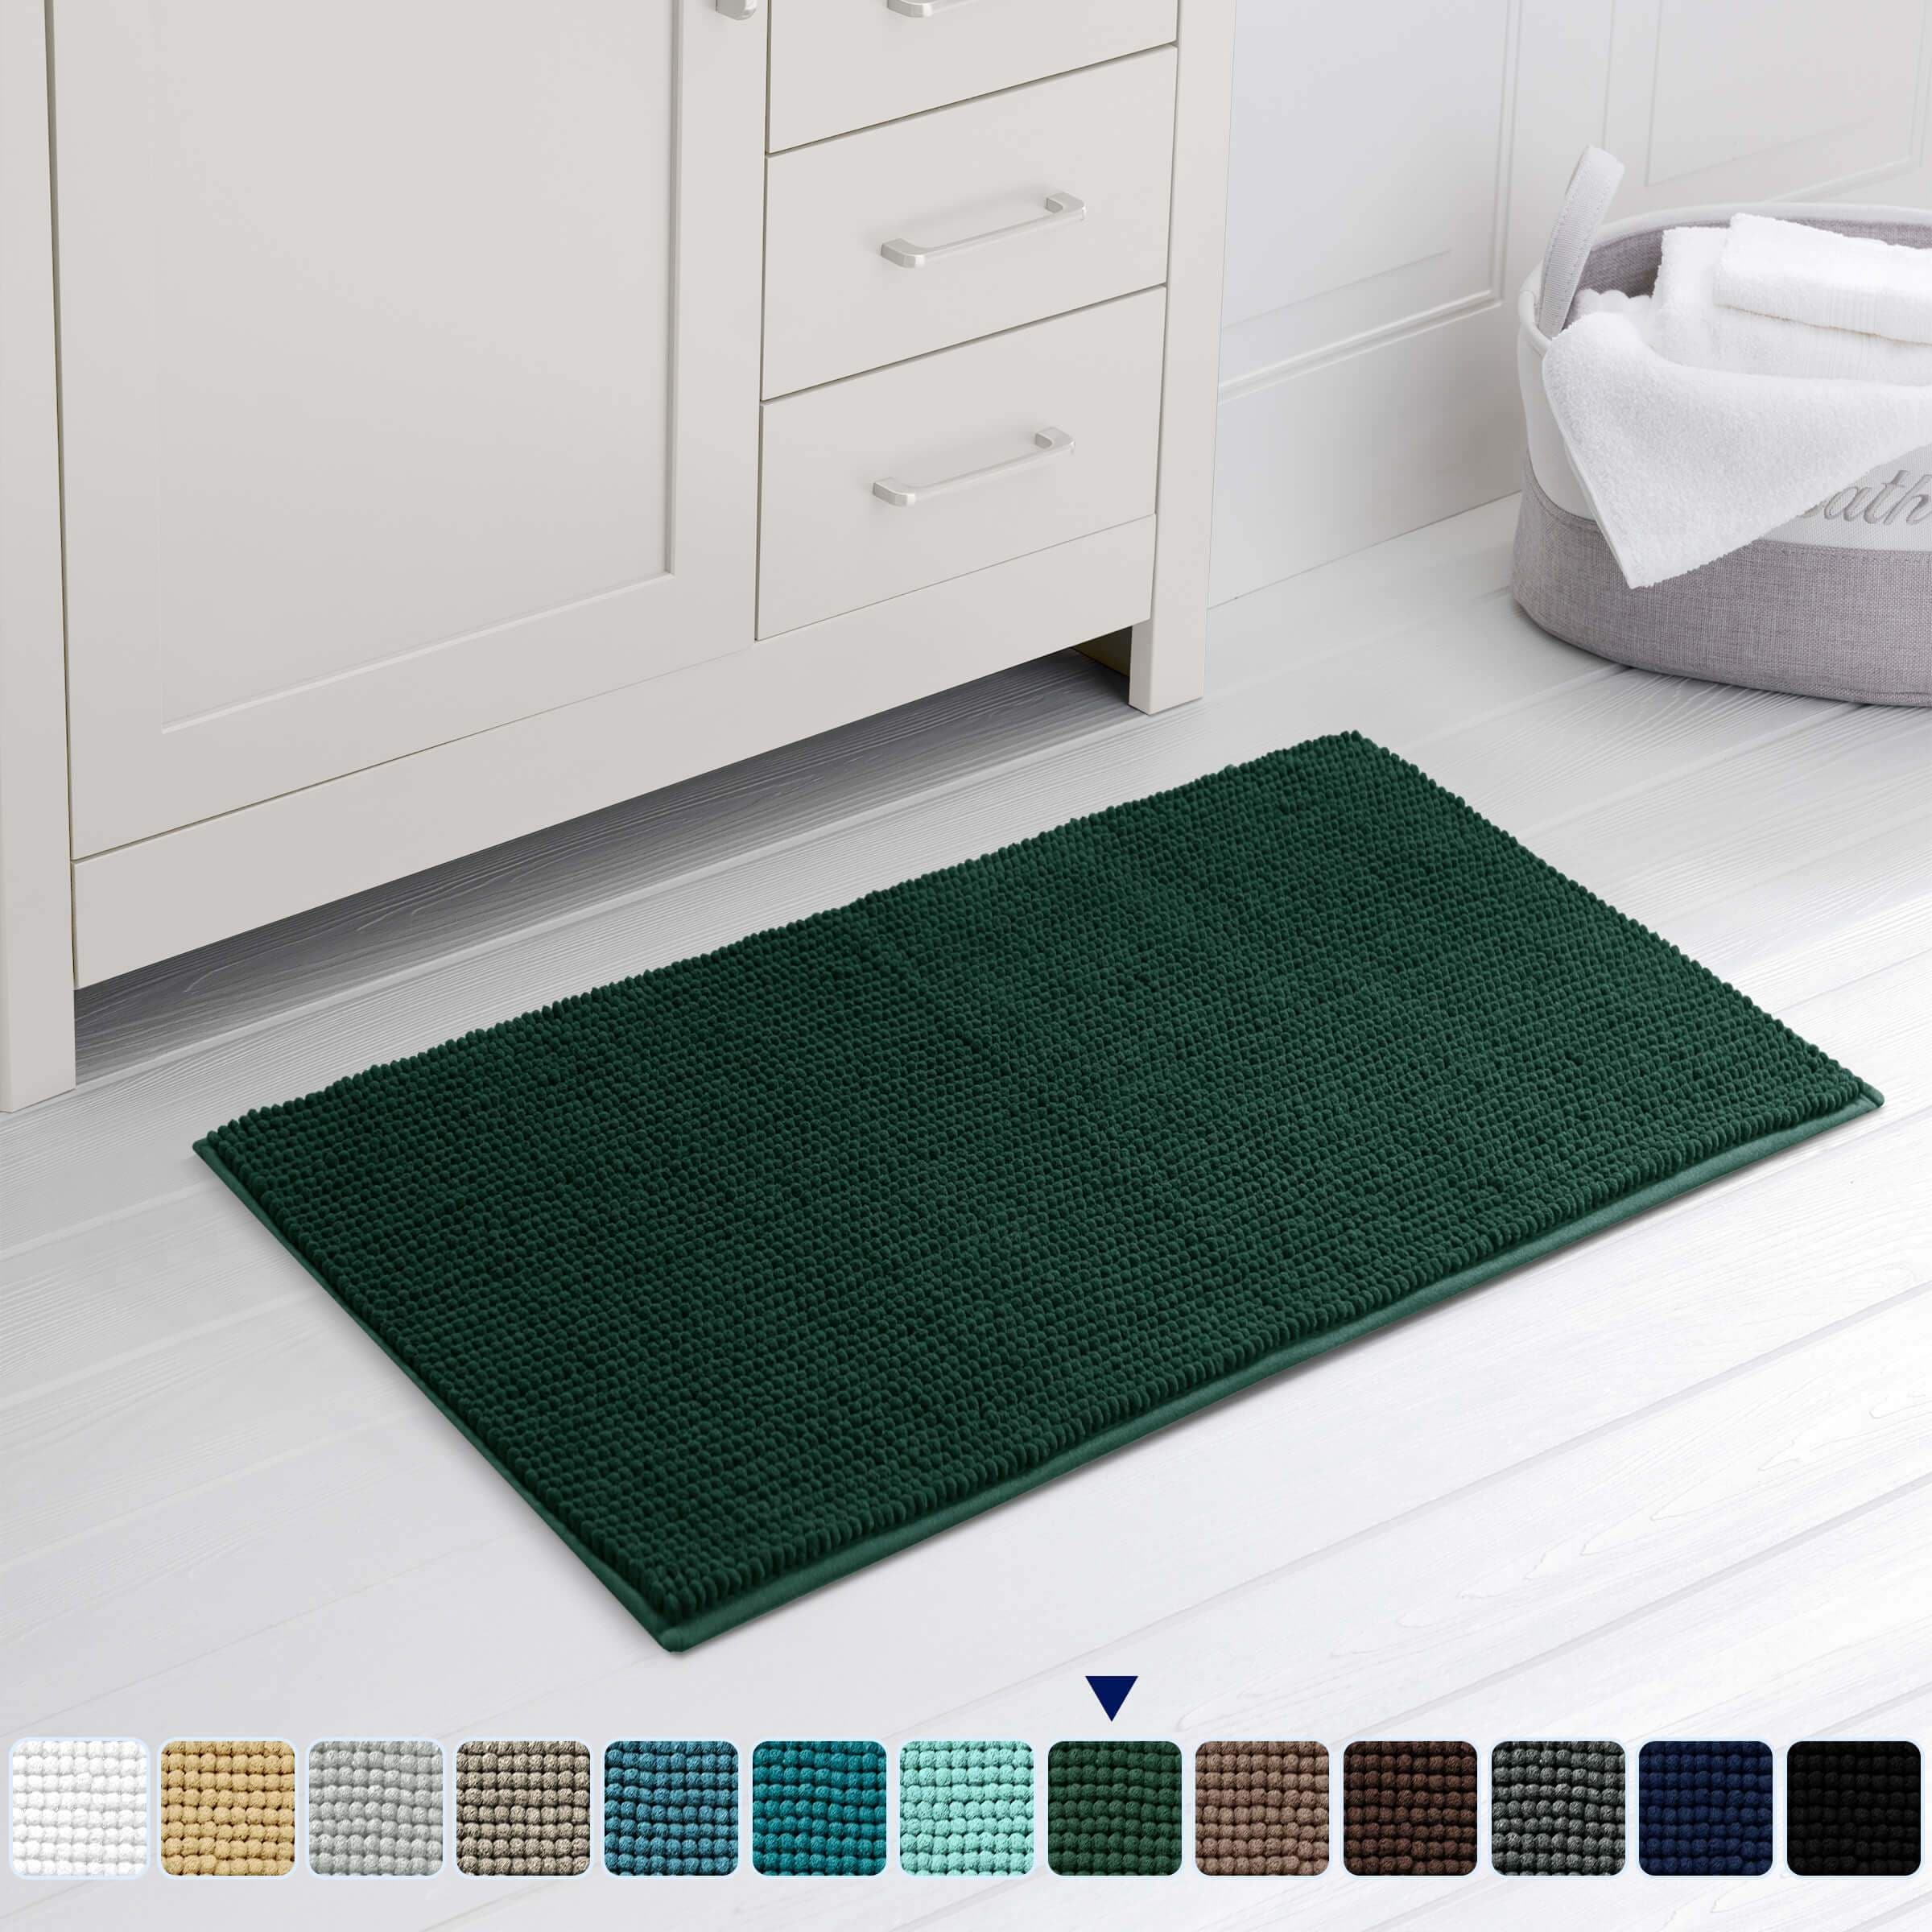 https://ak1.ostkcdn.com/images/products/is/images/direct/7e7ed9e01d66423010d32dfd834fbe93f49ef347/Subrtex-Chenille-Bathroom-Rugs-Soft-Super-Water-Absorbing-Shower-Mats.jpg